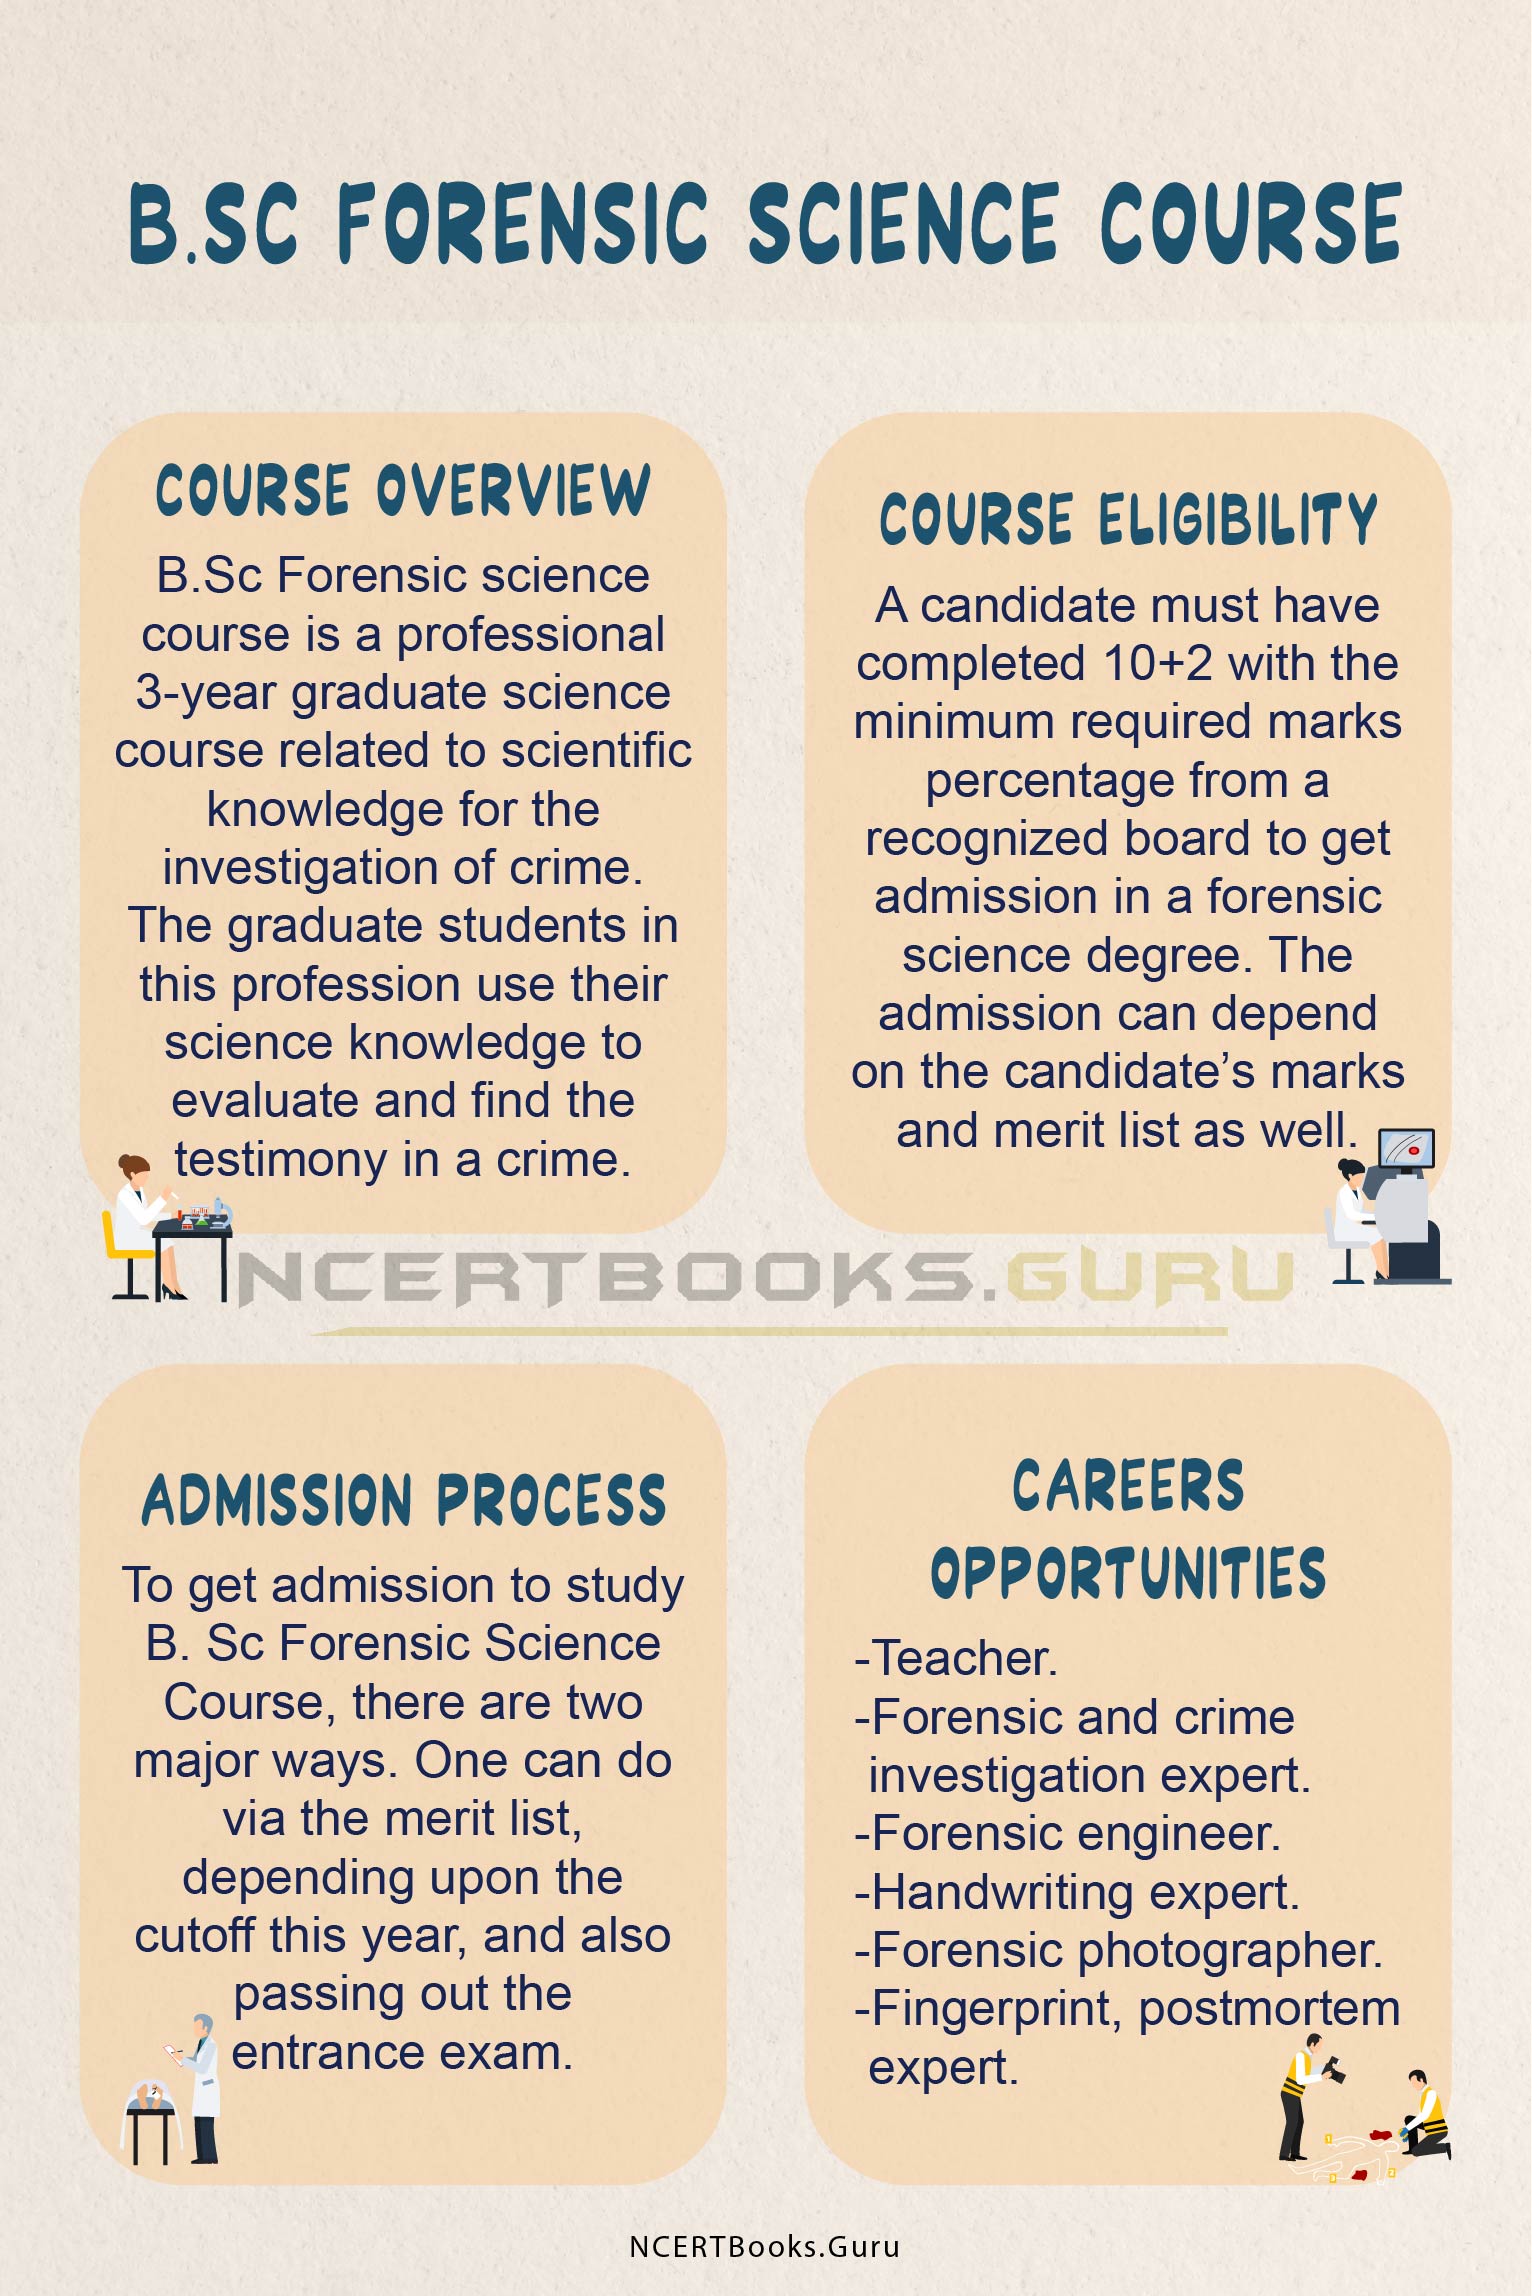 B.Sc Forensic Science Course